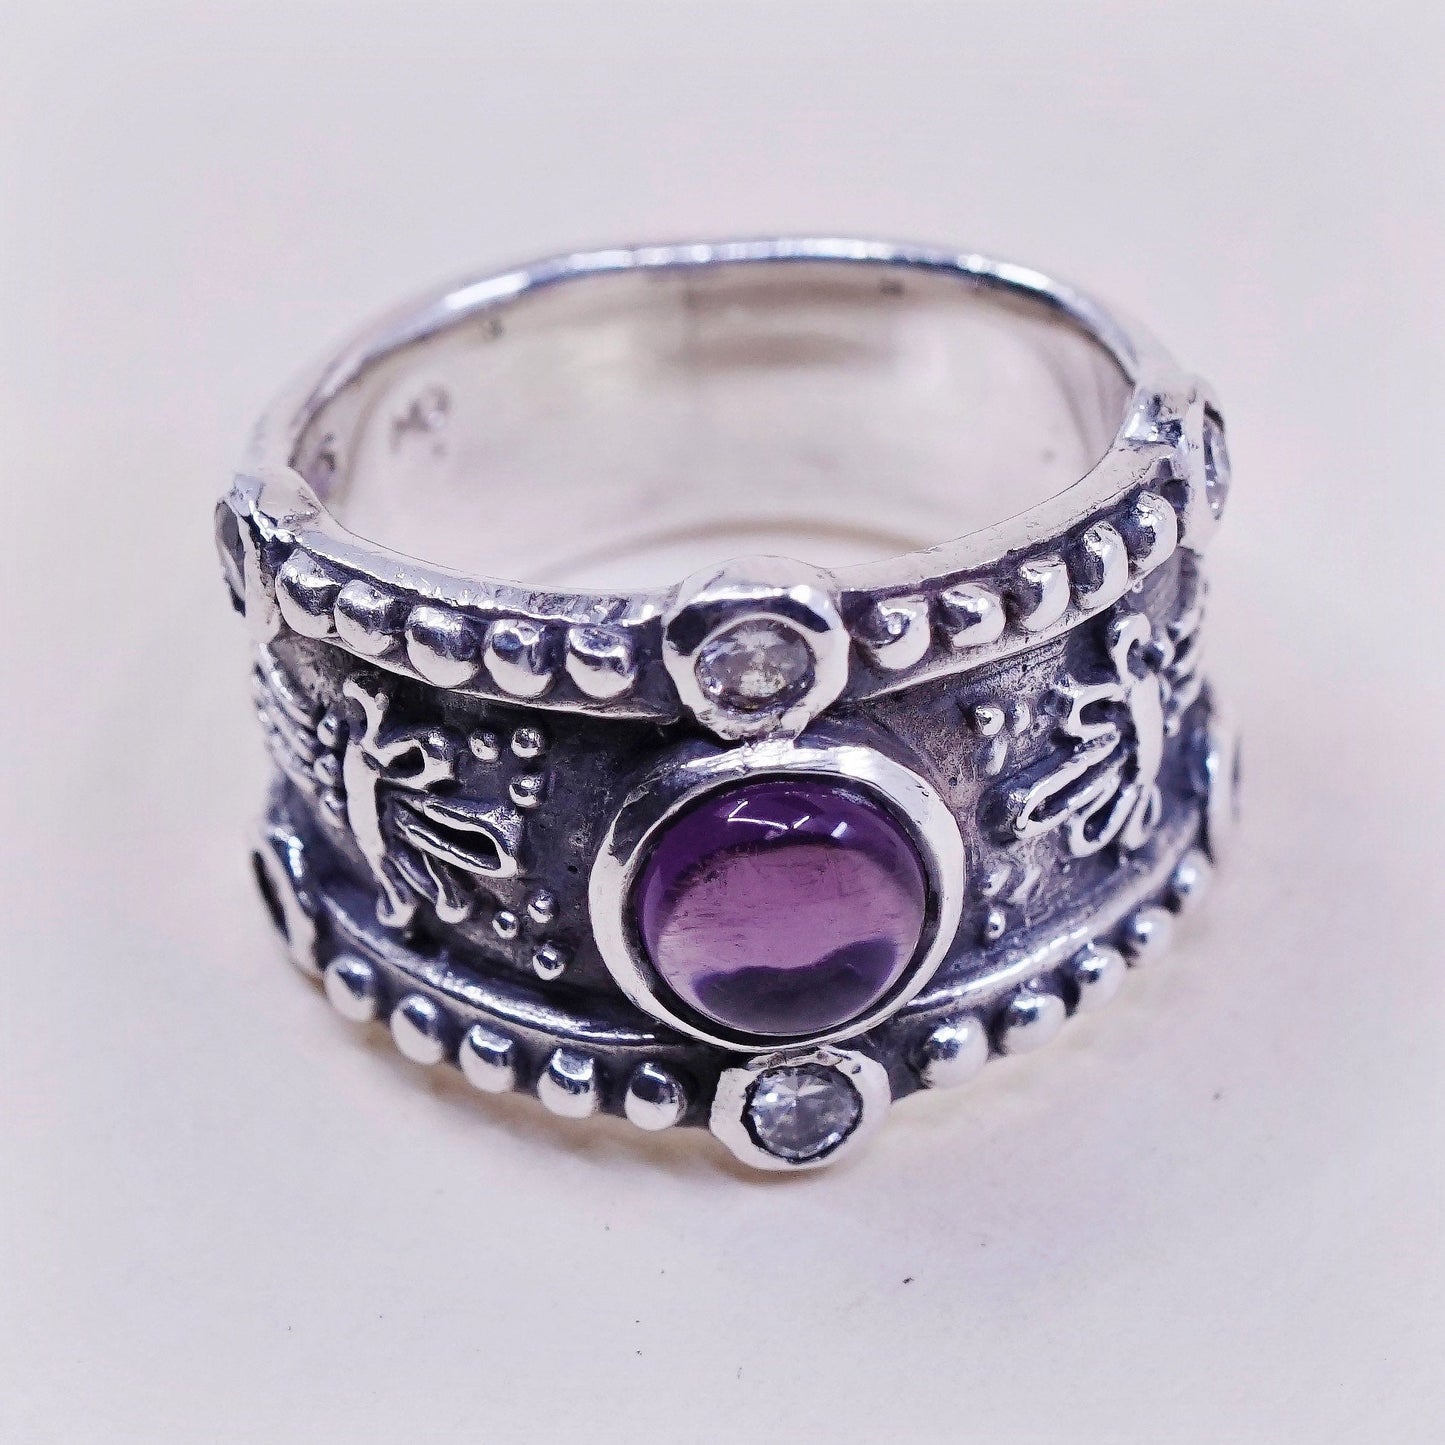 sz 6, sterling silver handmade statement ring, 925 wide band w/ amethyst and Cz